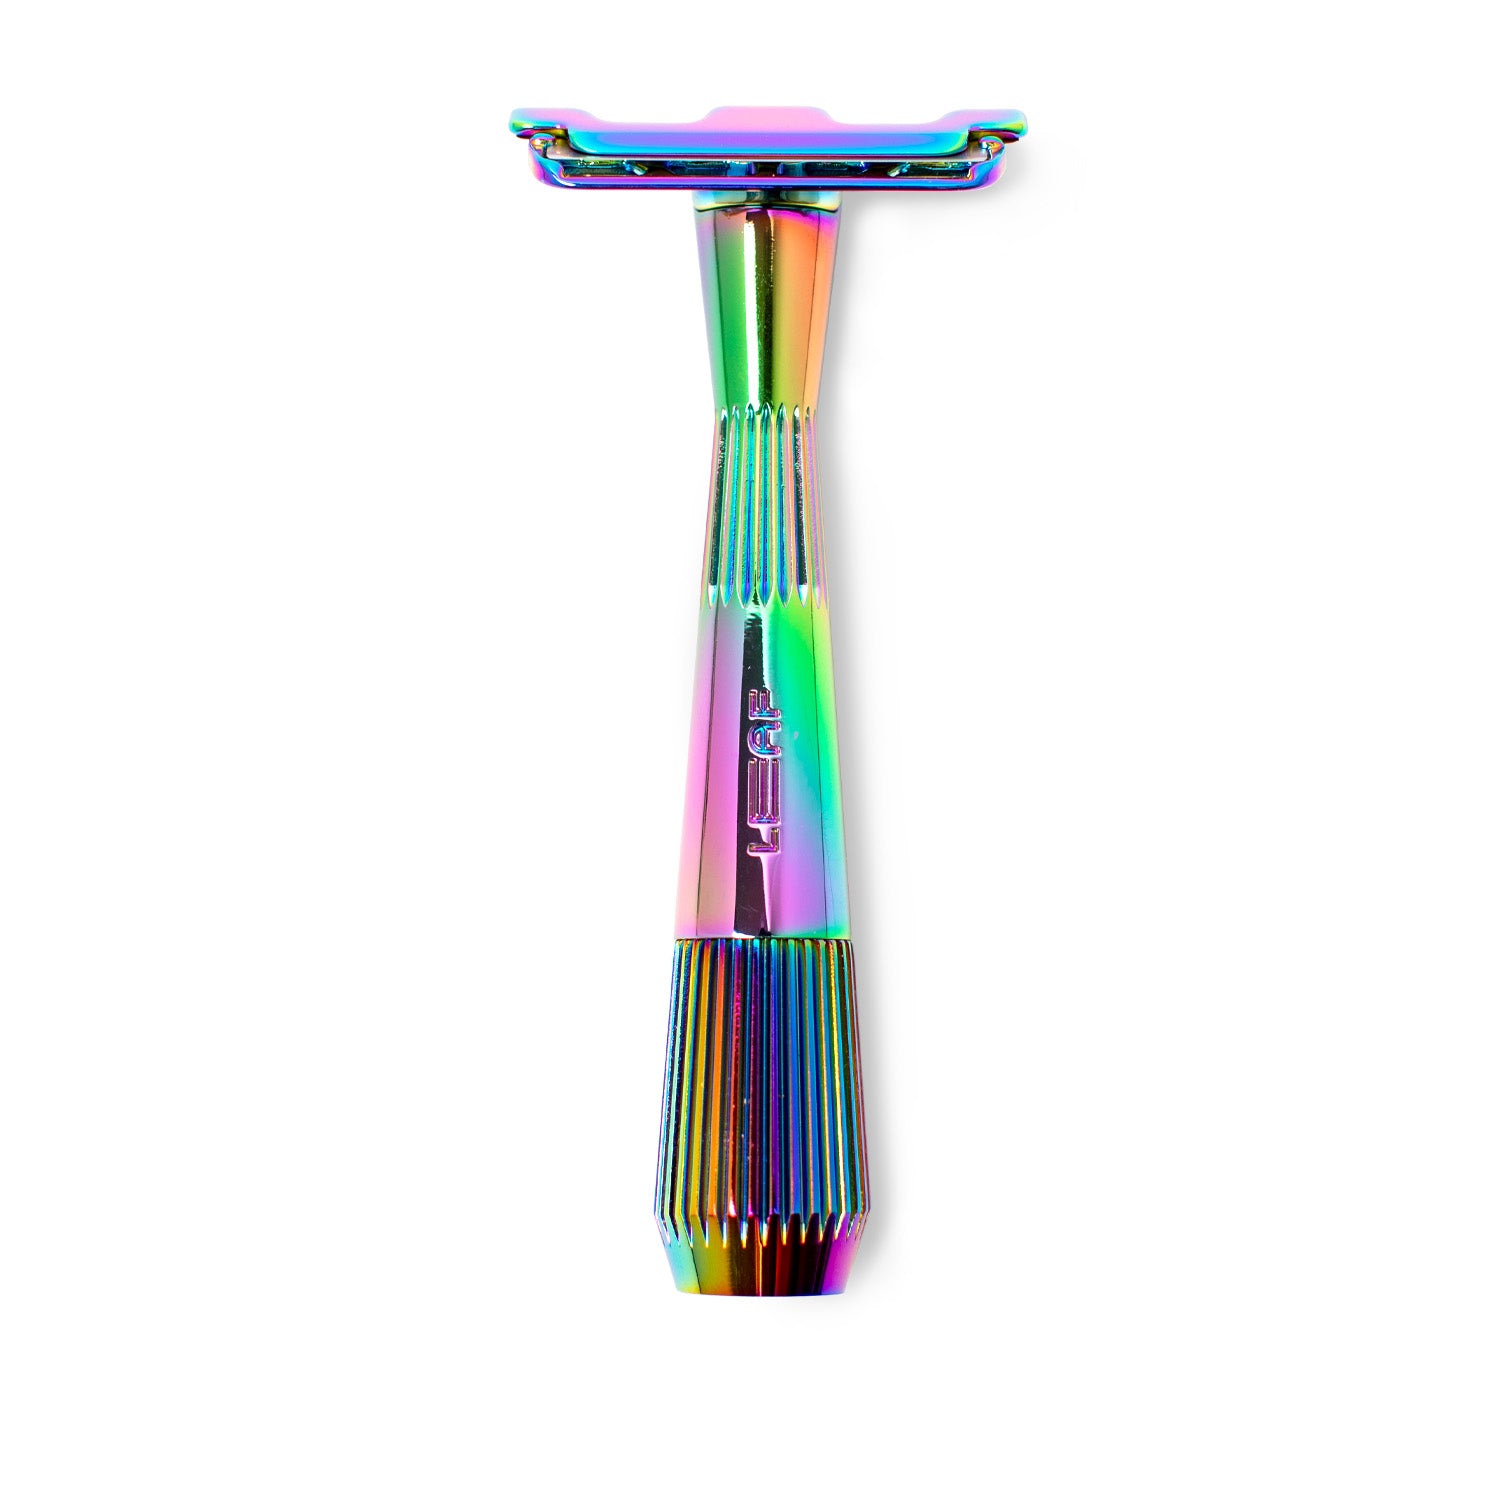 A Leaf Shave brand Single-Edge razor in the finish called Prism